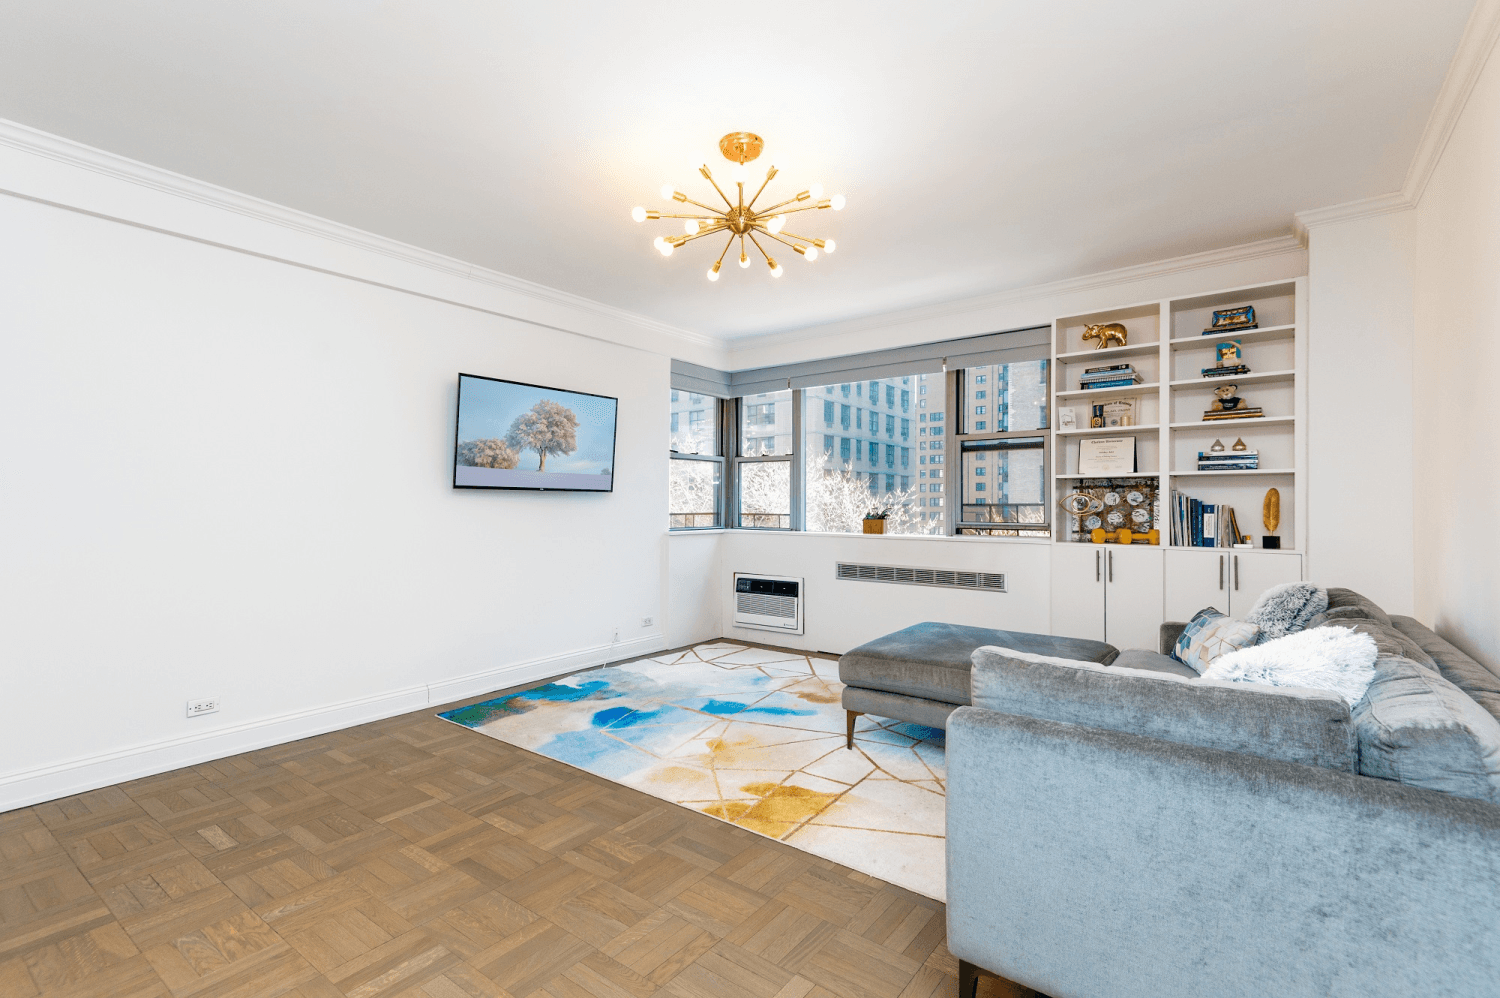 Look no further than this stunning, fully renovated studio located at 30 West 60th Street, The Coliseum in the heart of New York City.